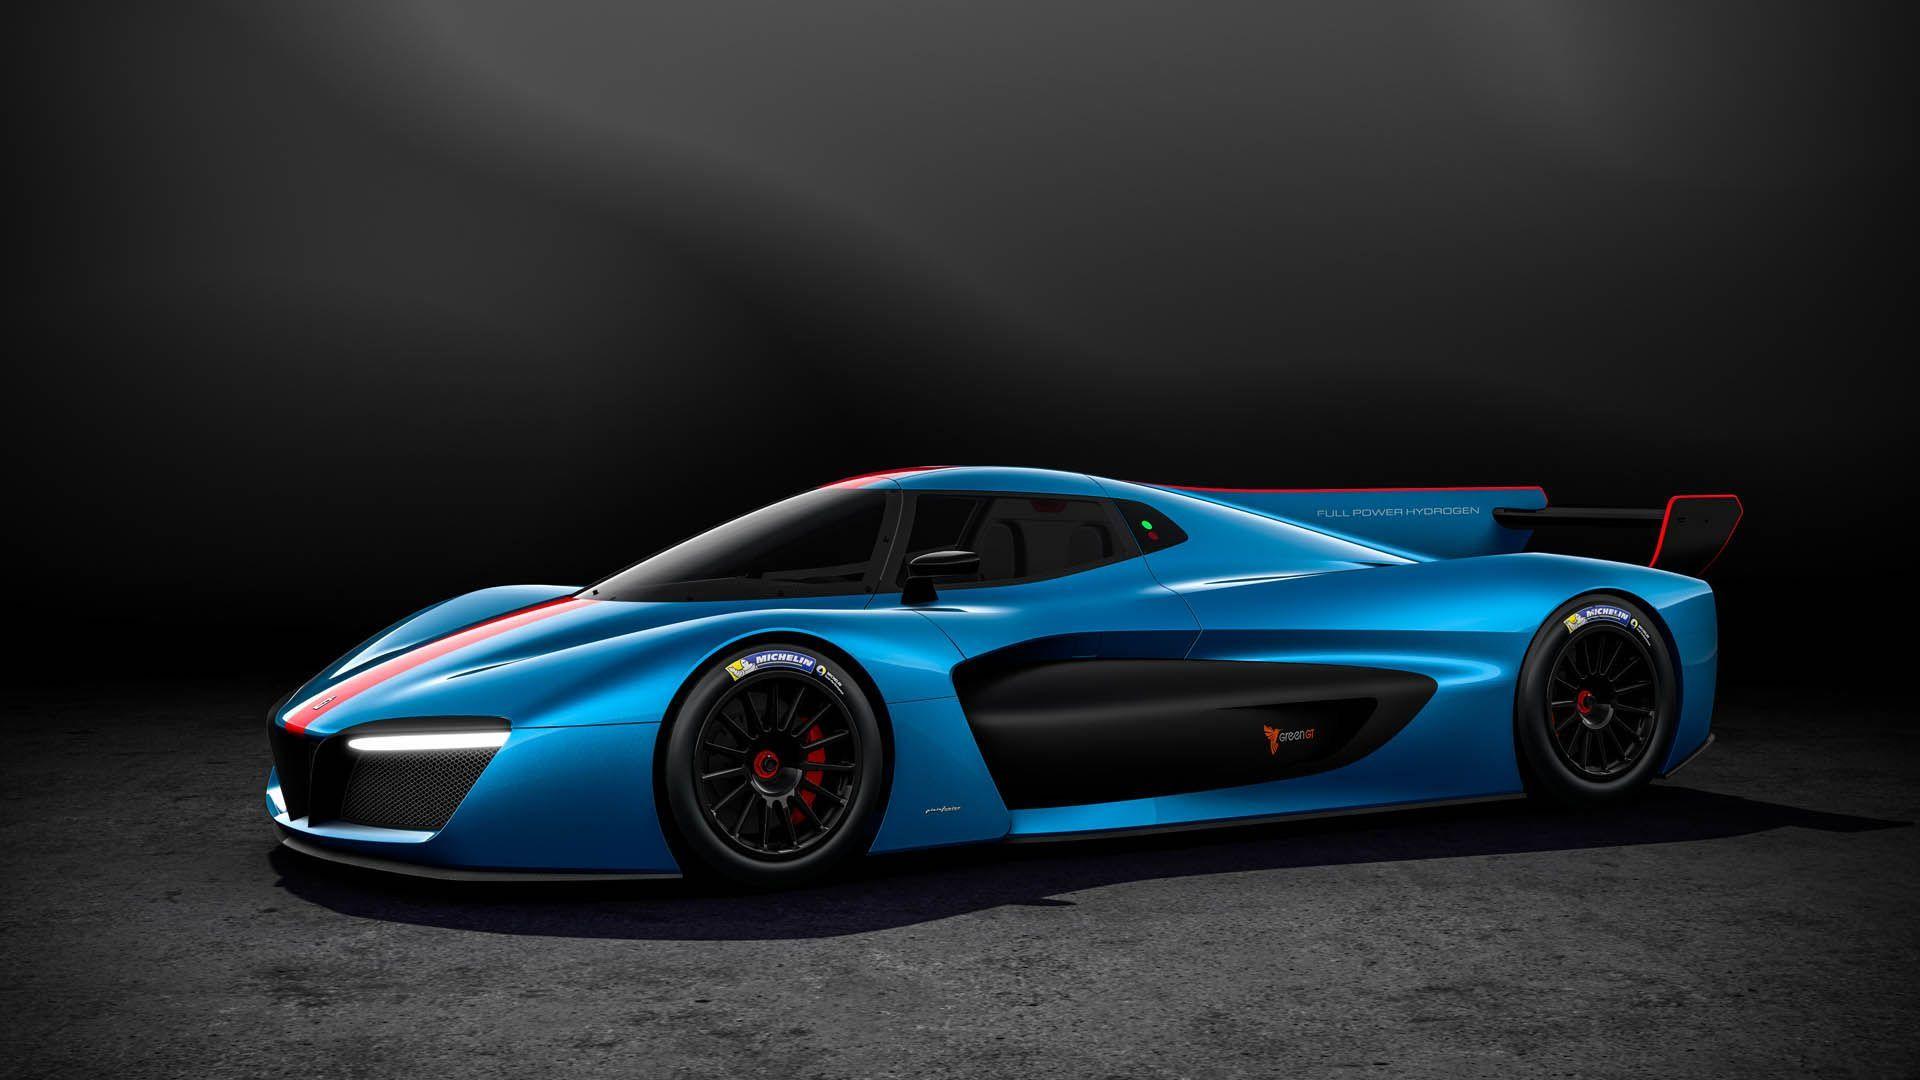 Pininfarina Hypercar To Hit 60 MPH In Under 2 Seconds